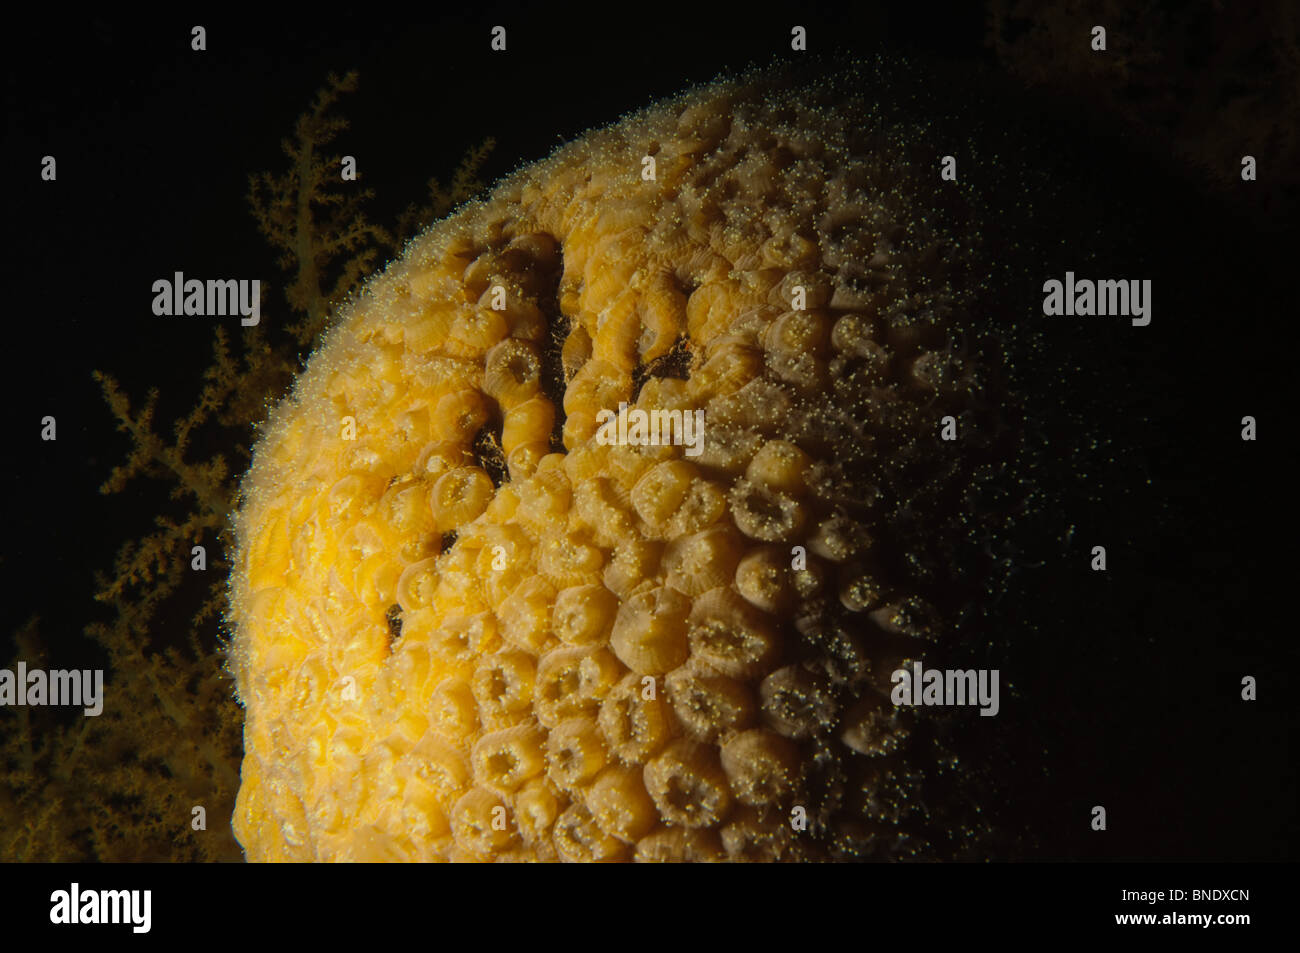 Israel, Eilat, Red Sea, – Underwater photograph of a Brain coral (Favia sp.) with extended Polyps at night. Stock Photo